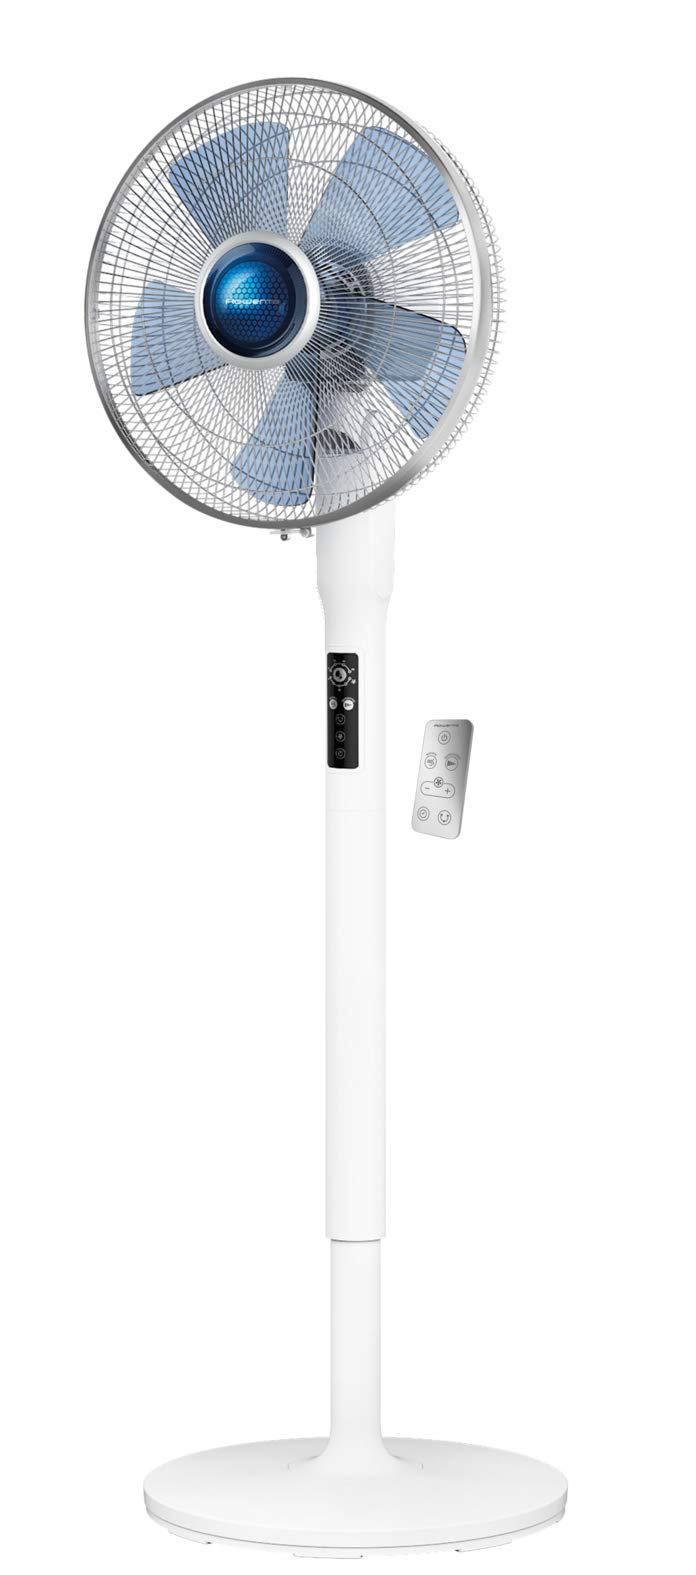 Rowenta Turbo Silence Standing Floor Fan with Remote 53 Inches Ultra Quiet Fan Oscillating, Portable, 5 Speeds, Indoor, Refresh Up to 23-Feet VU5870,White